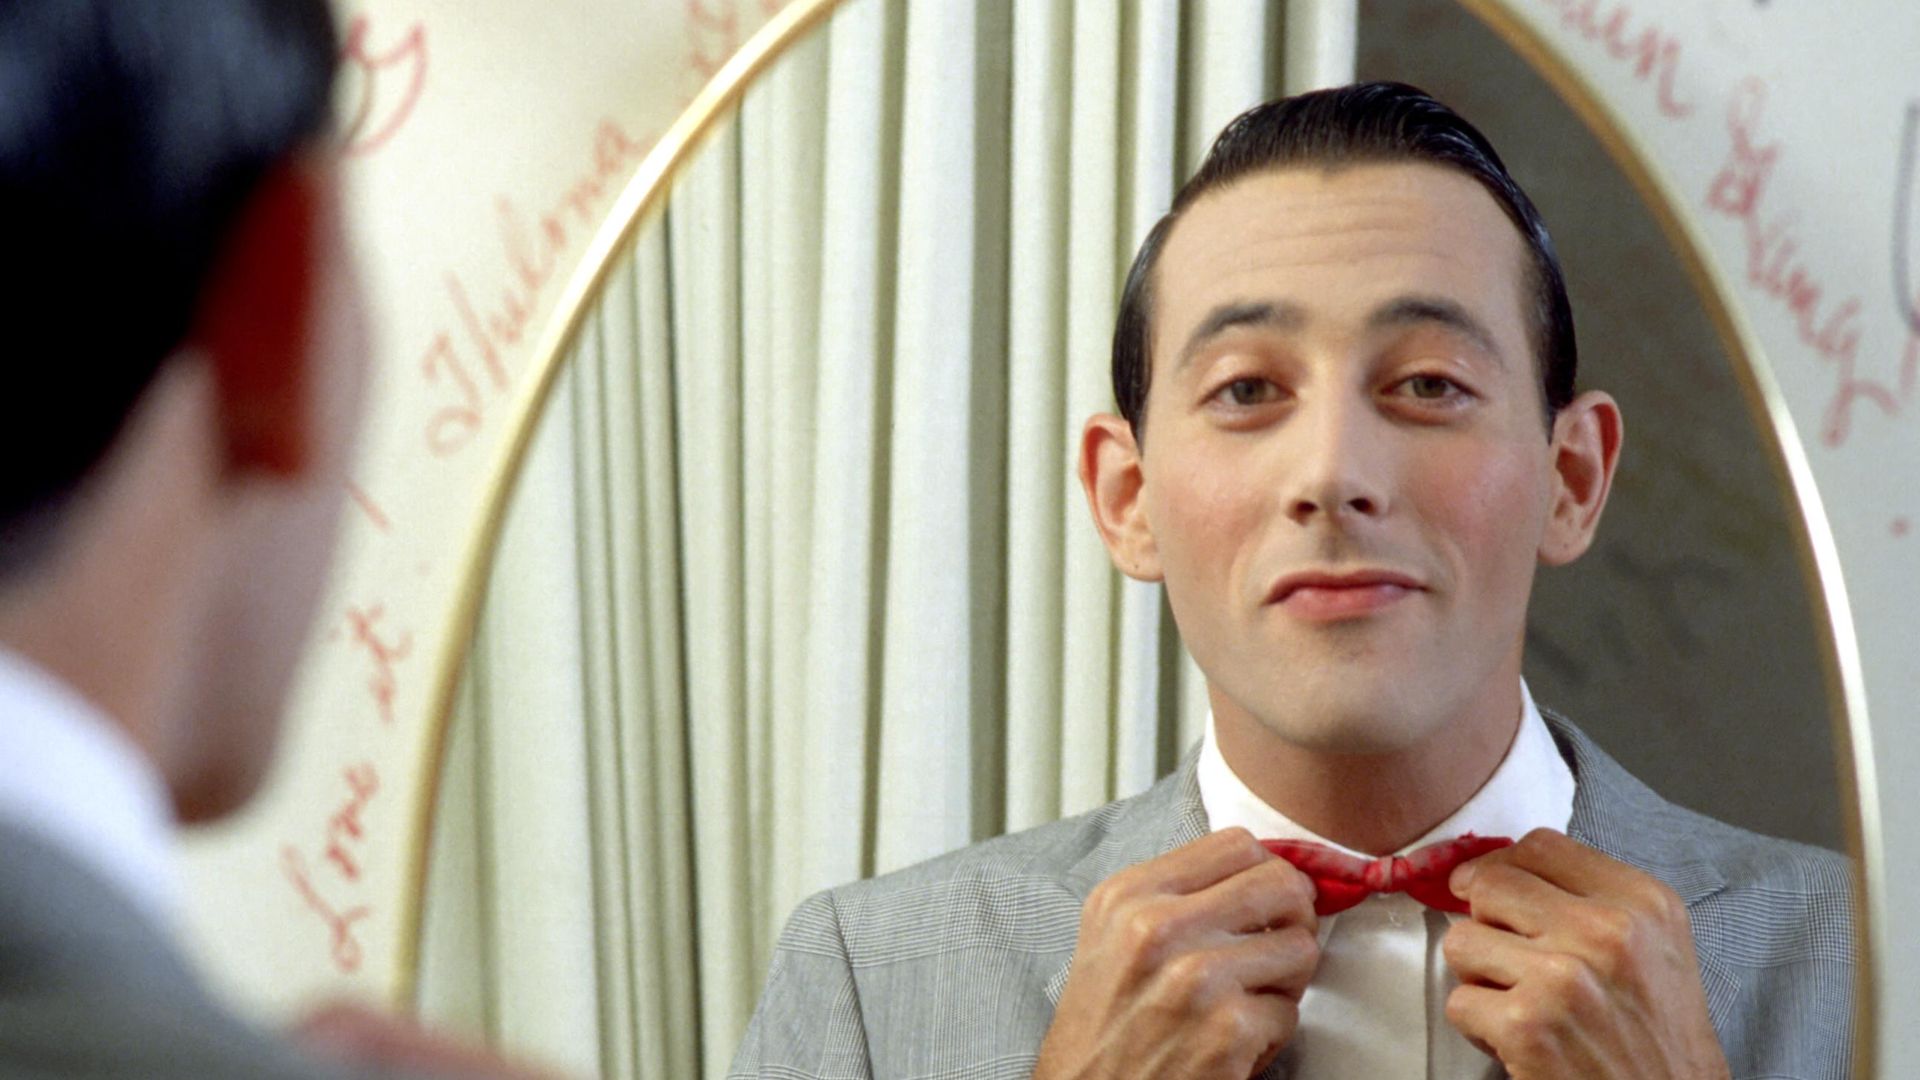 Paul Reubens poses for a portrait dressed as his character Pee-wee Herman in May 1980 in Los Angeles, California.